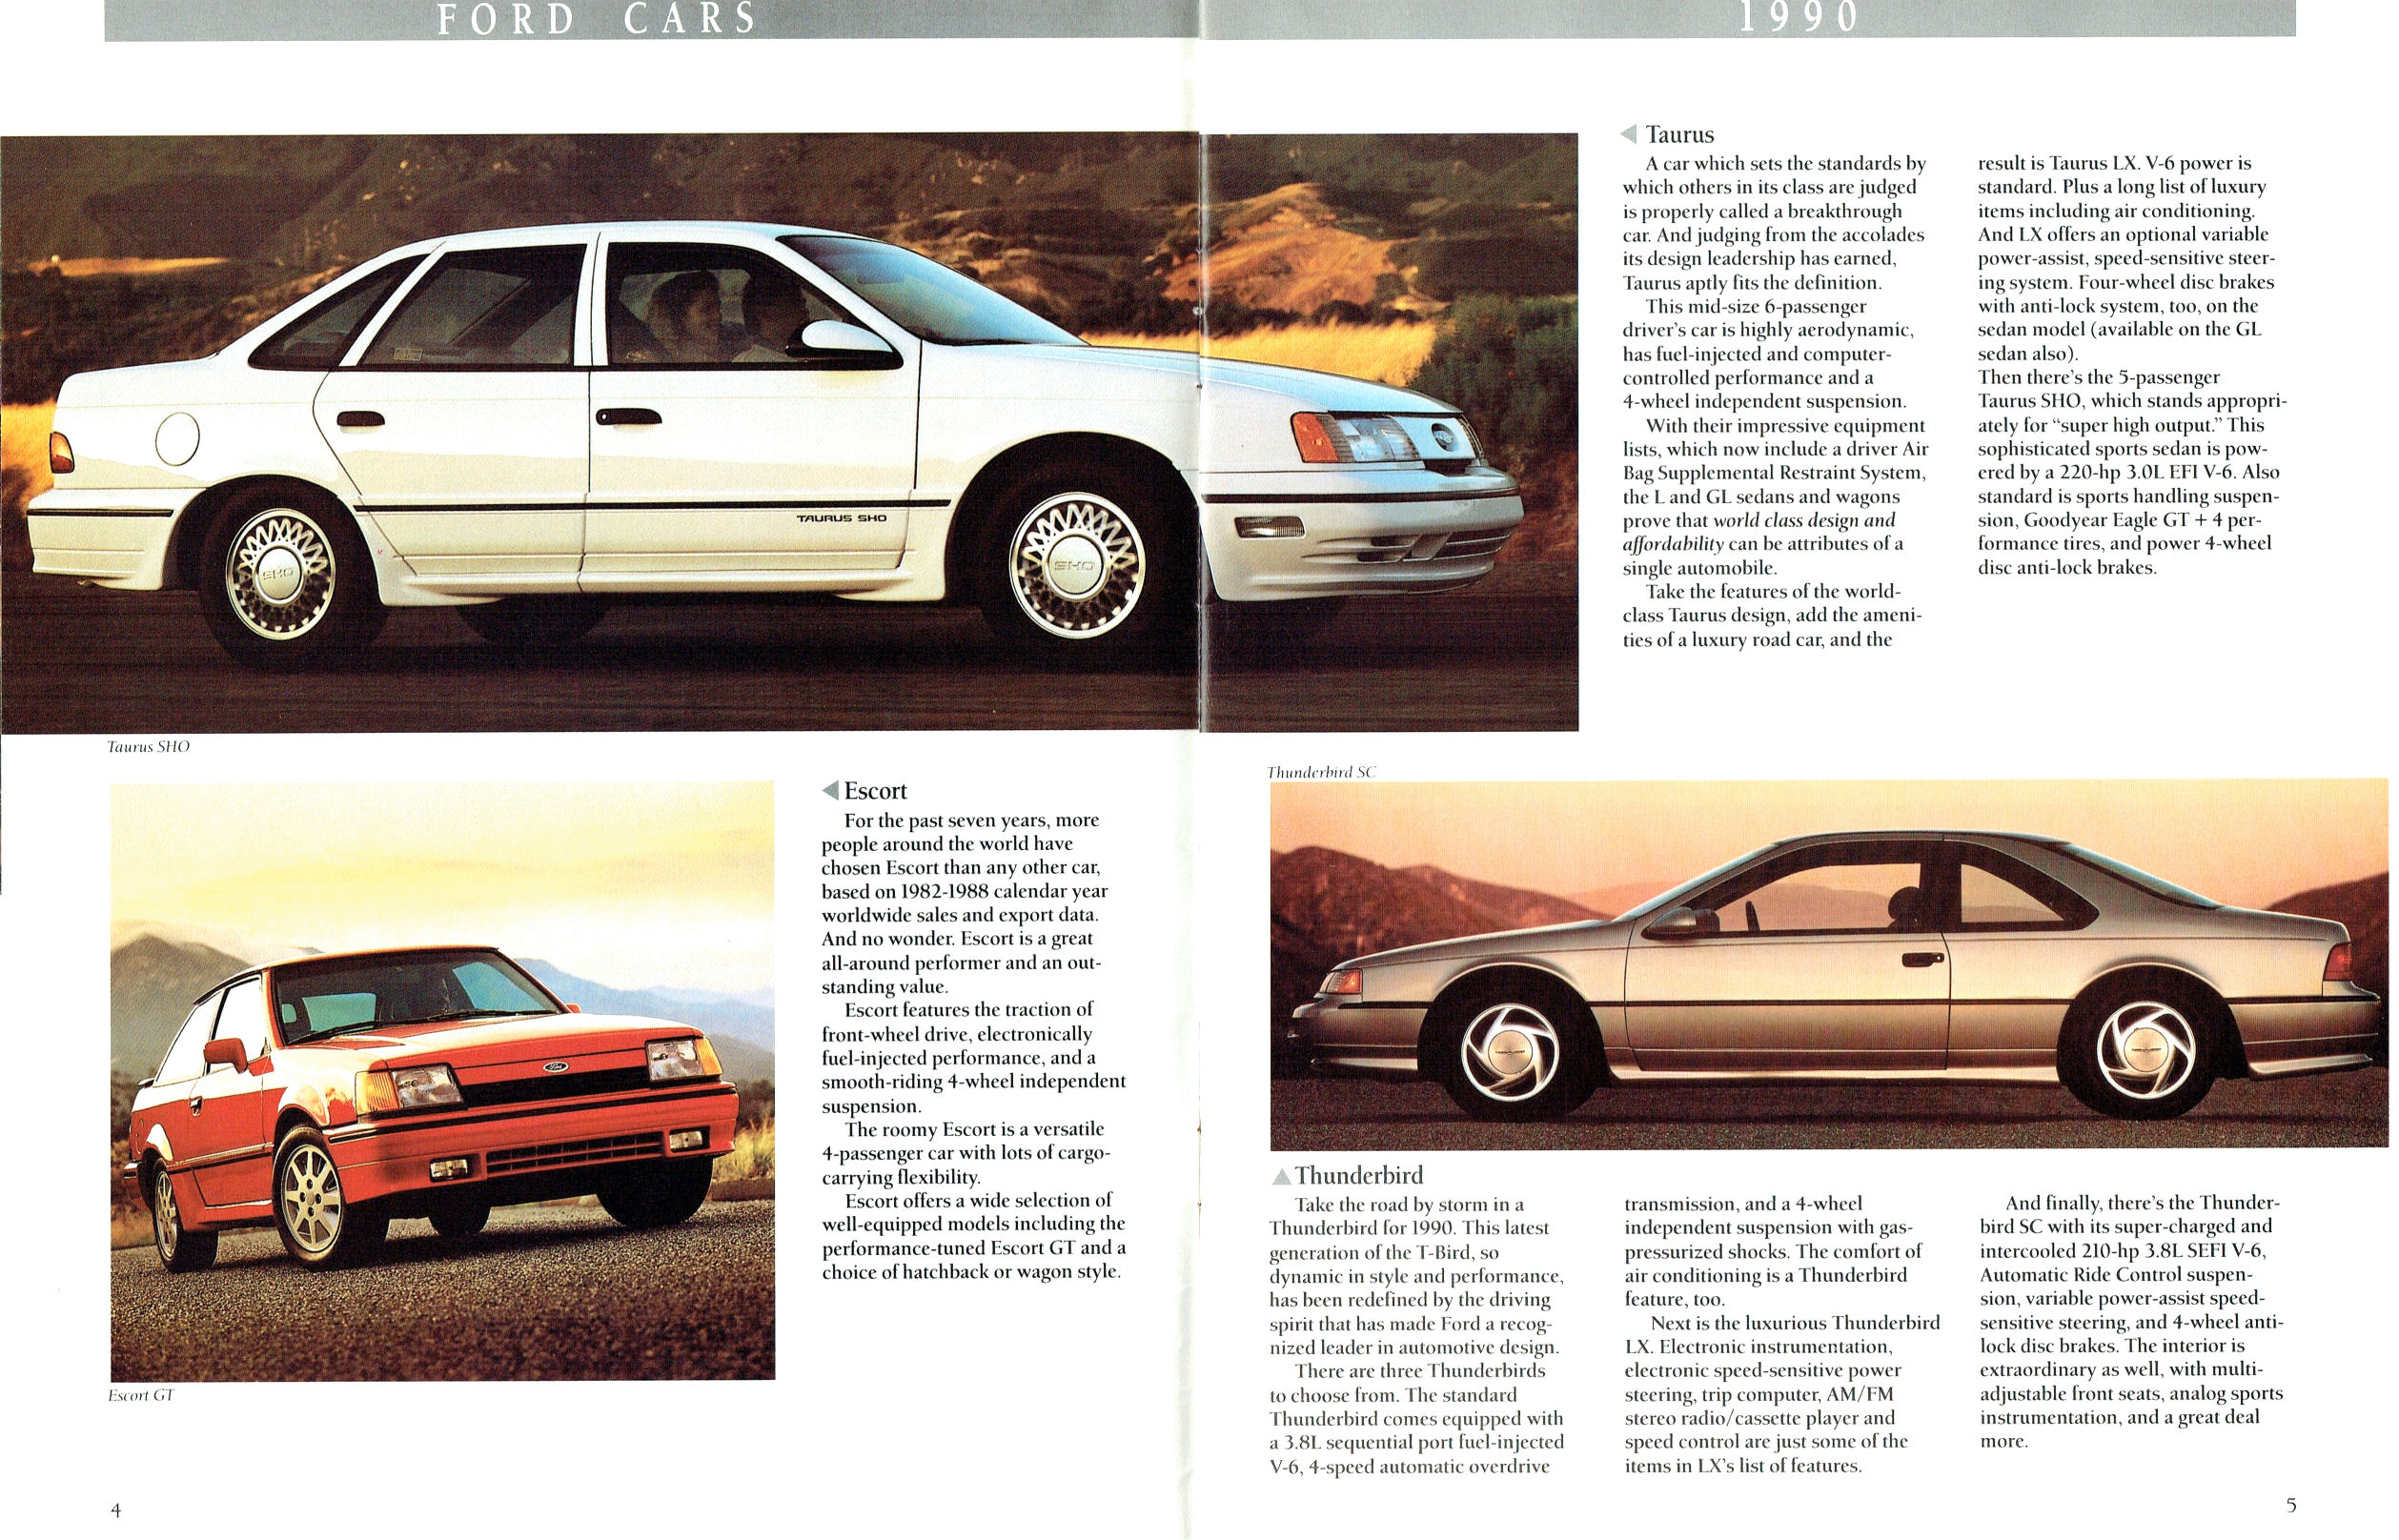 1990_Ford_Collection_Cdn-04-05